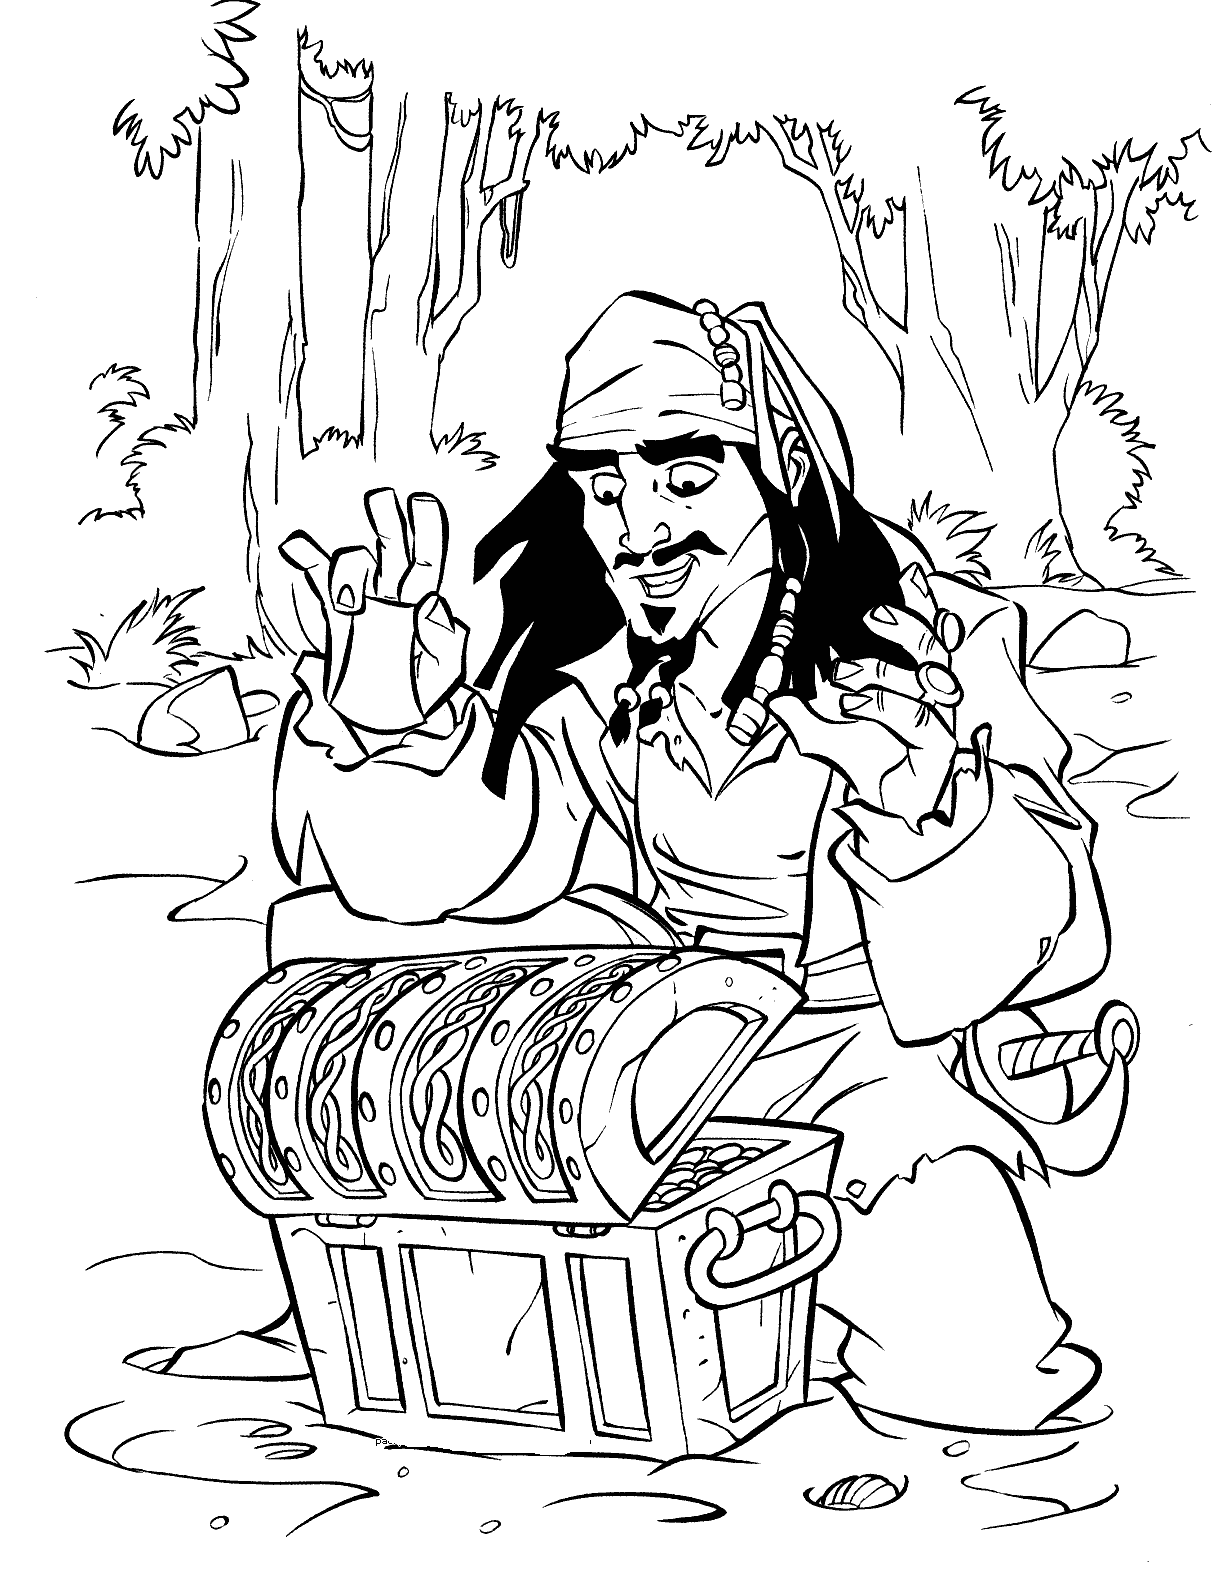 Pirates of the Caribbean coloring pages to download and print for free